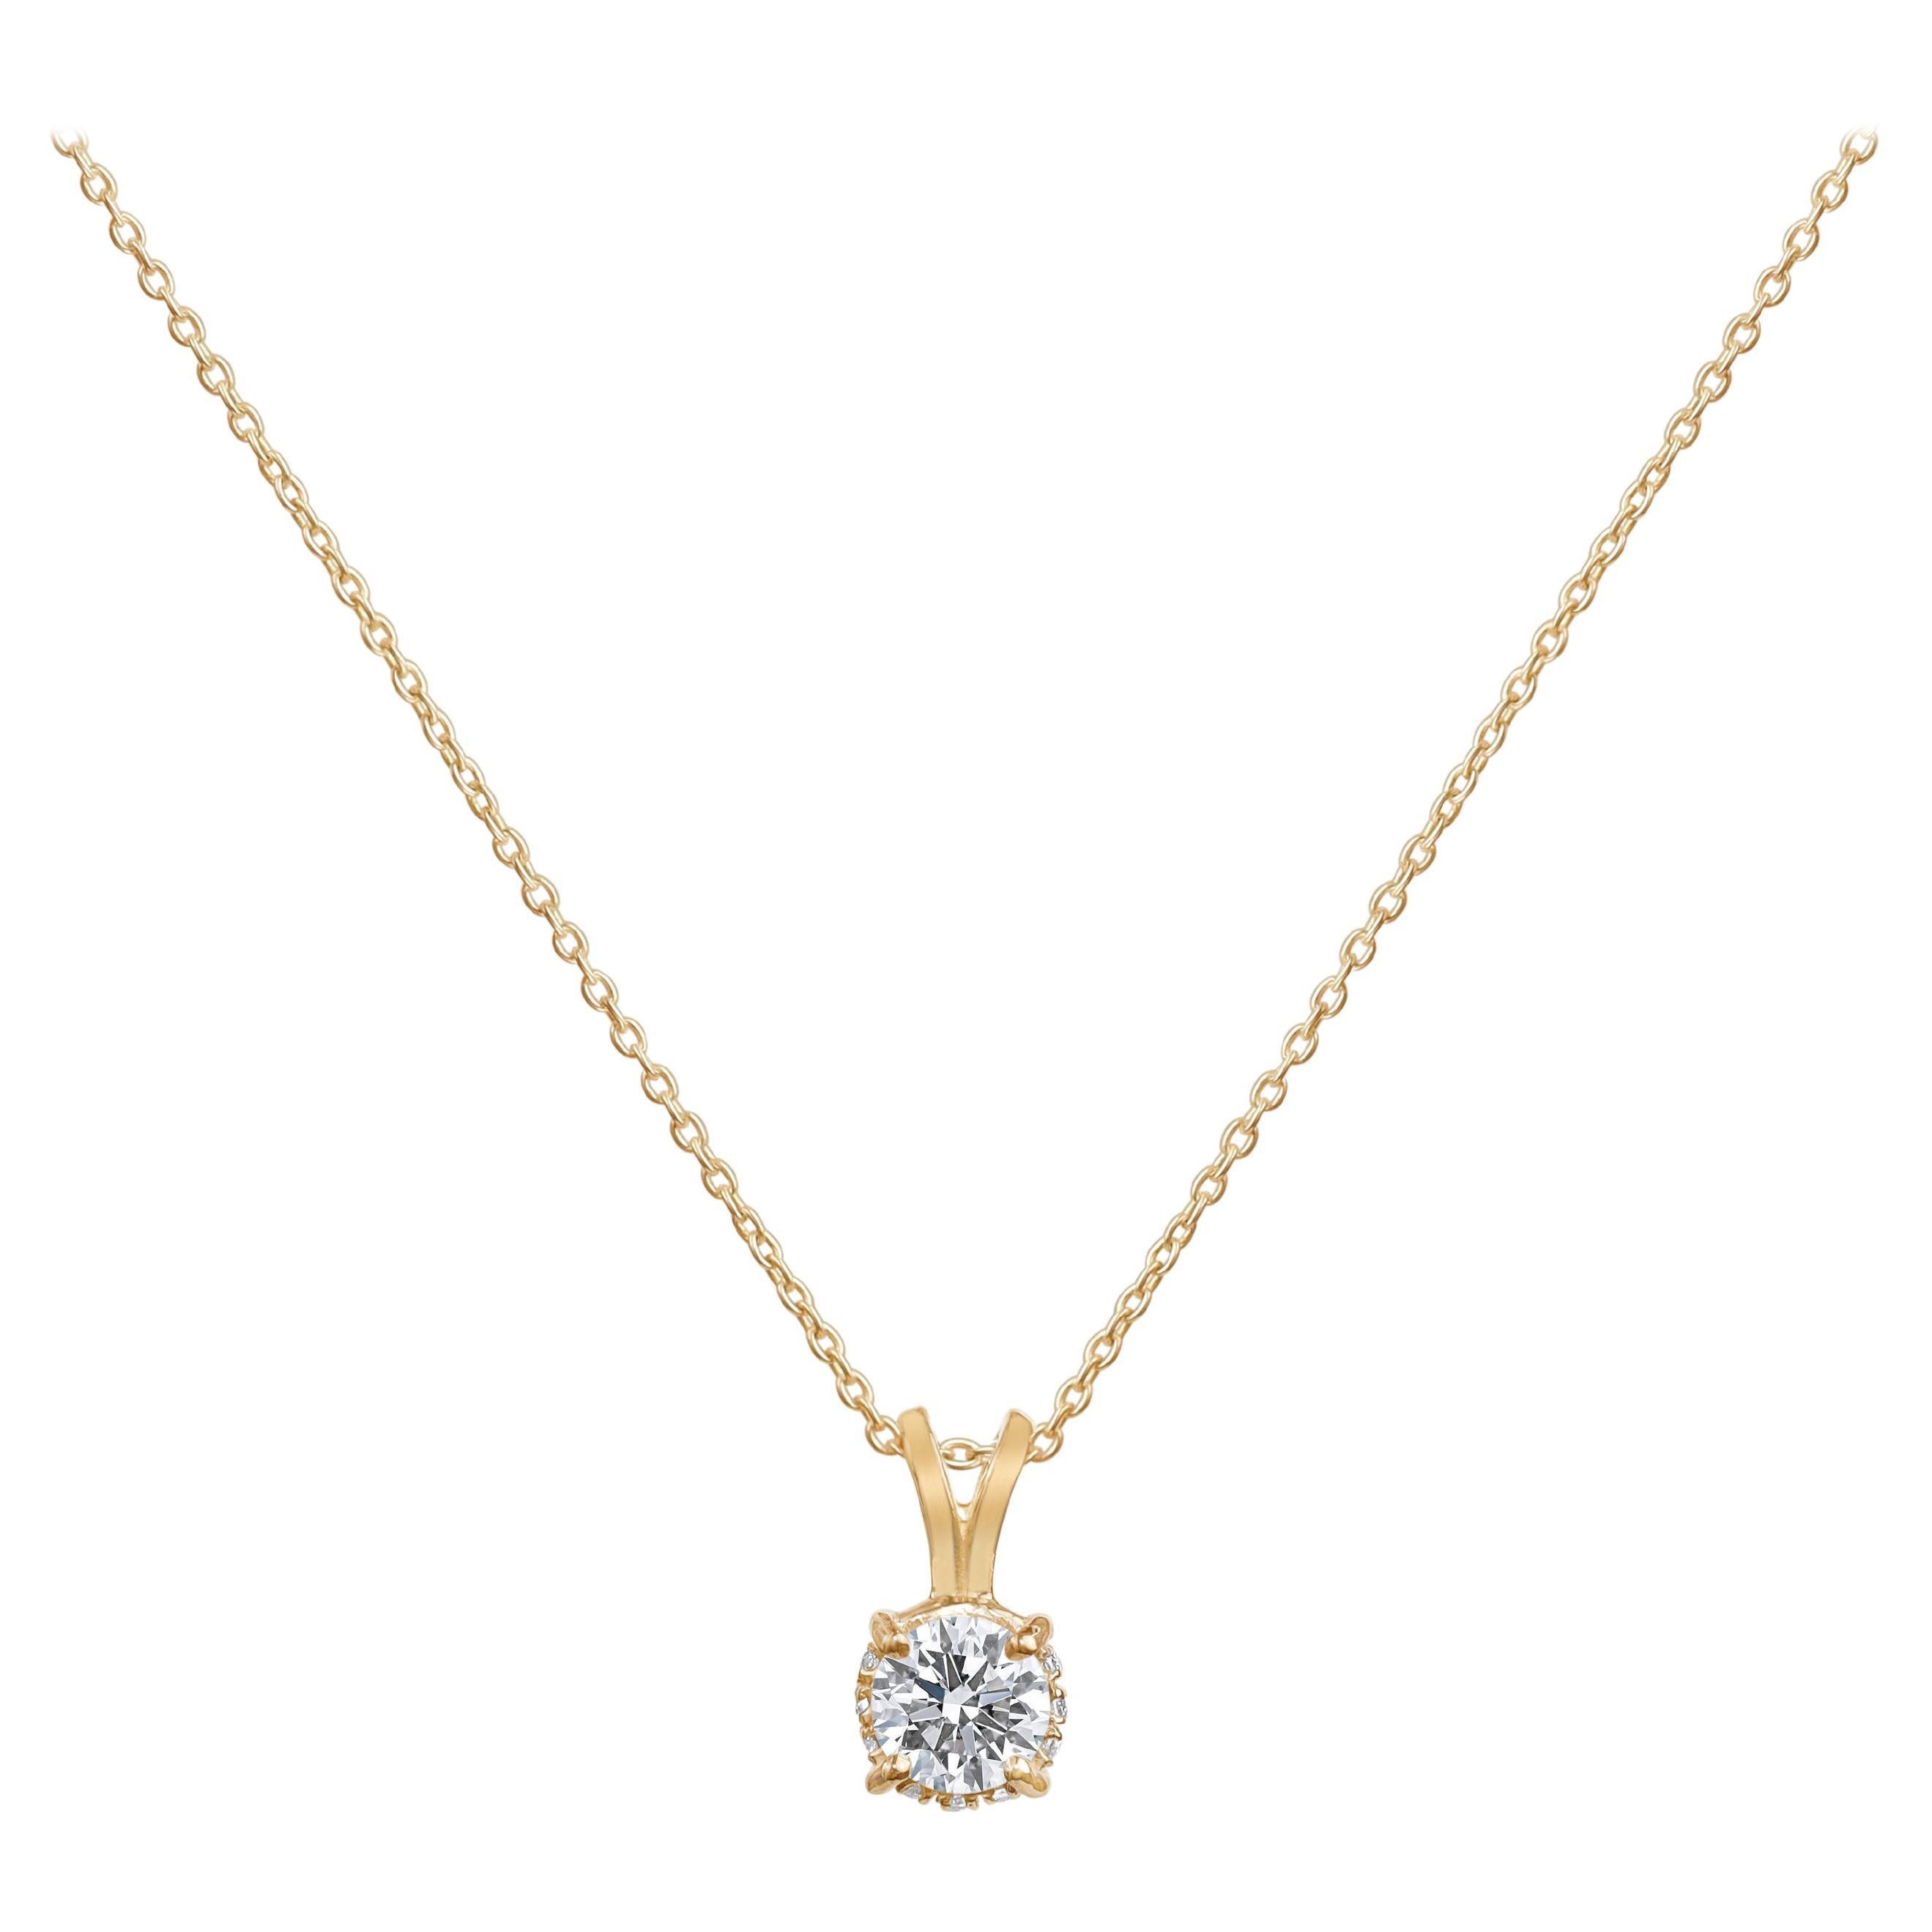 GIA Report Certified 1.5 Carat D Colorless IF Round Cut Diamond Pendant Necklace For Sale